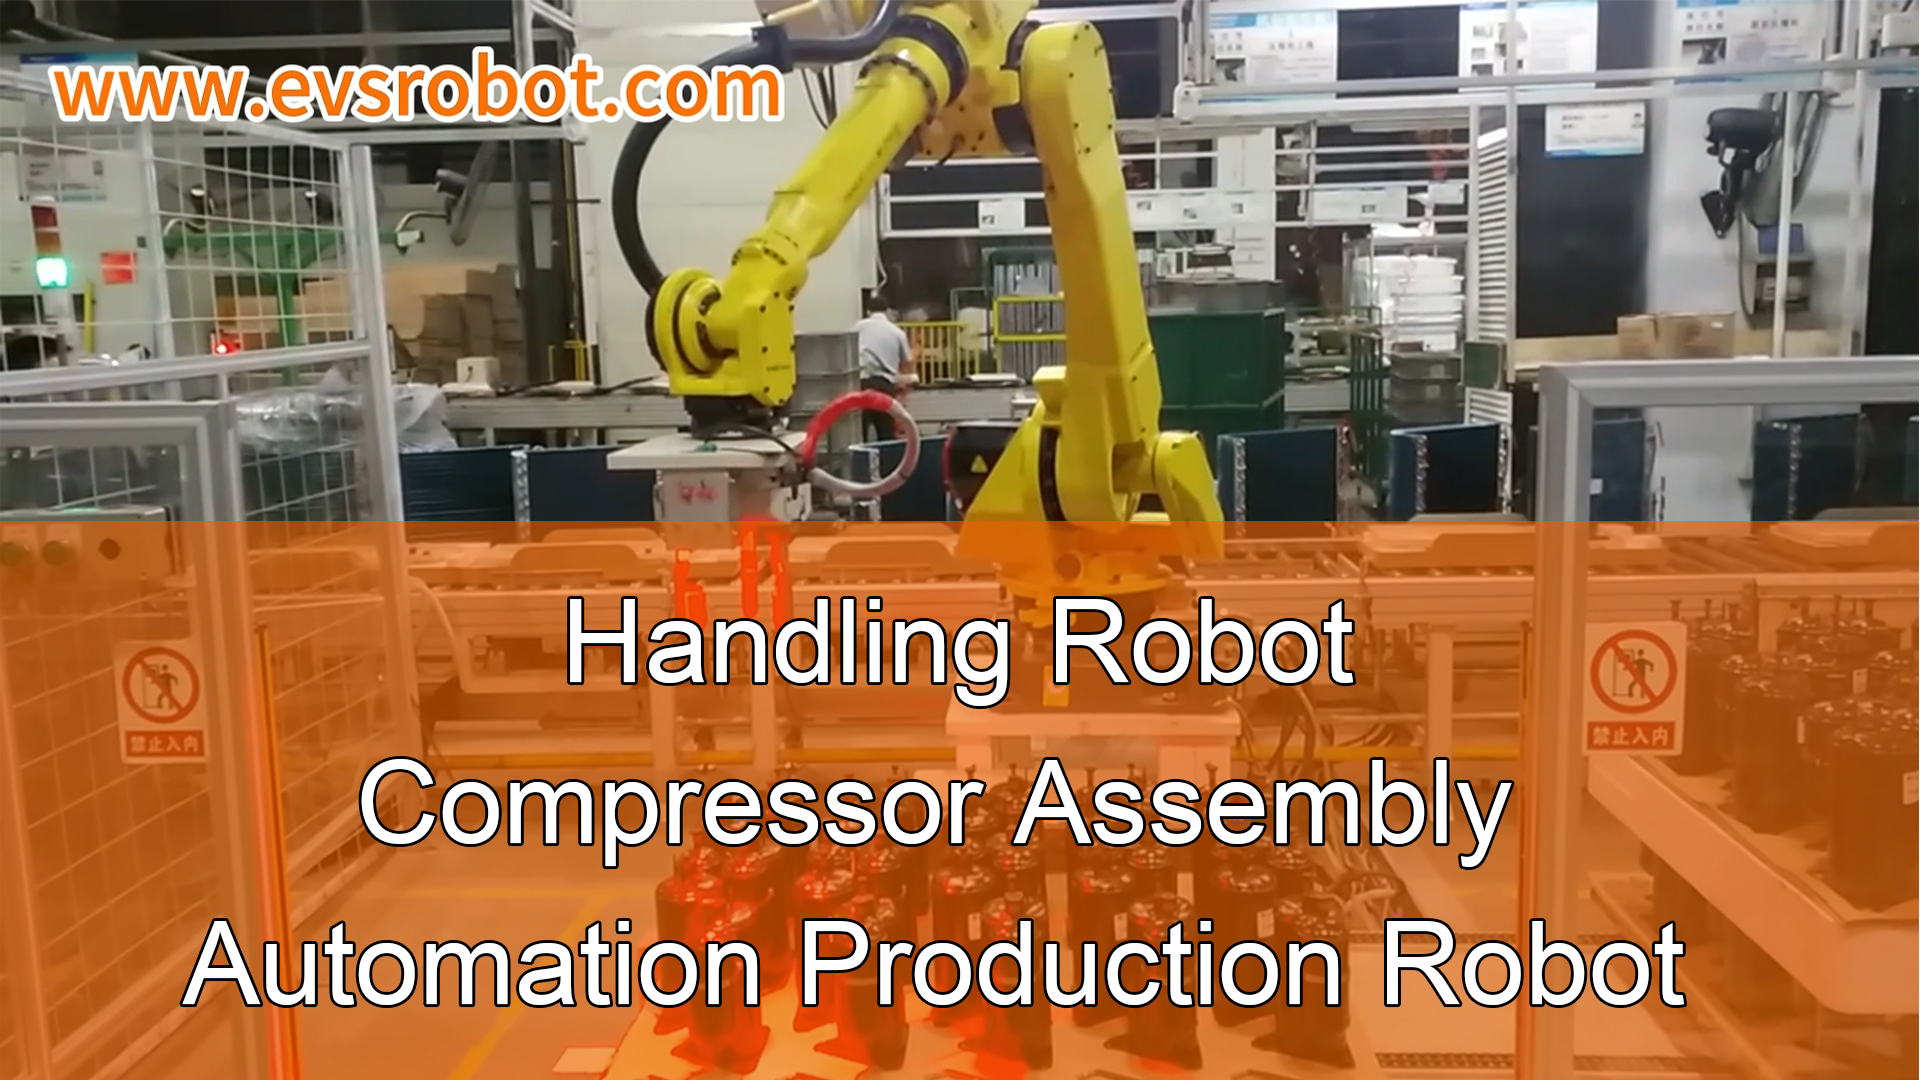 Handling Robot | Compressor Assembly | Automation Production Robot